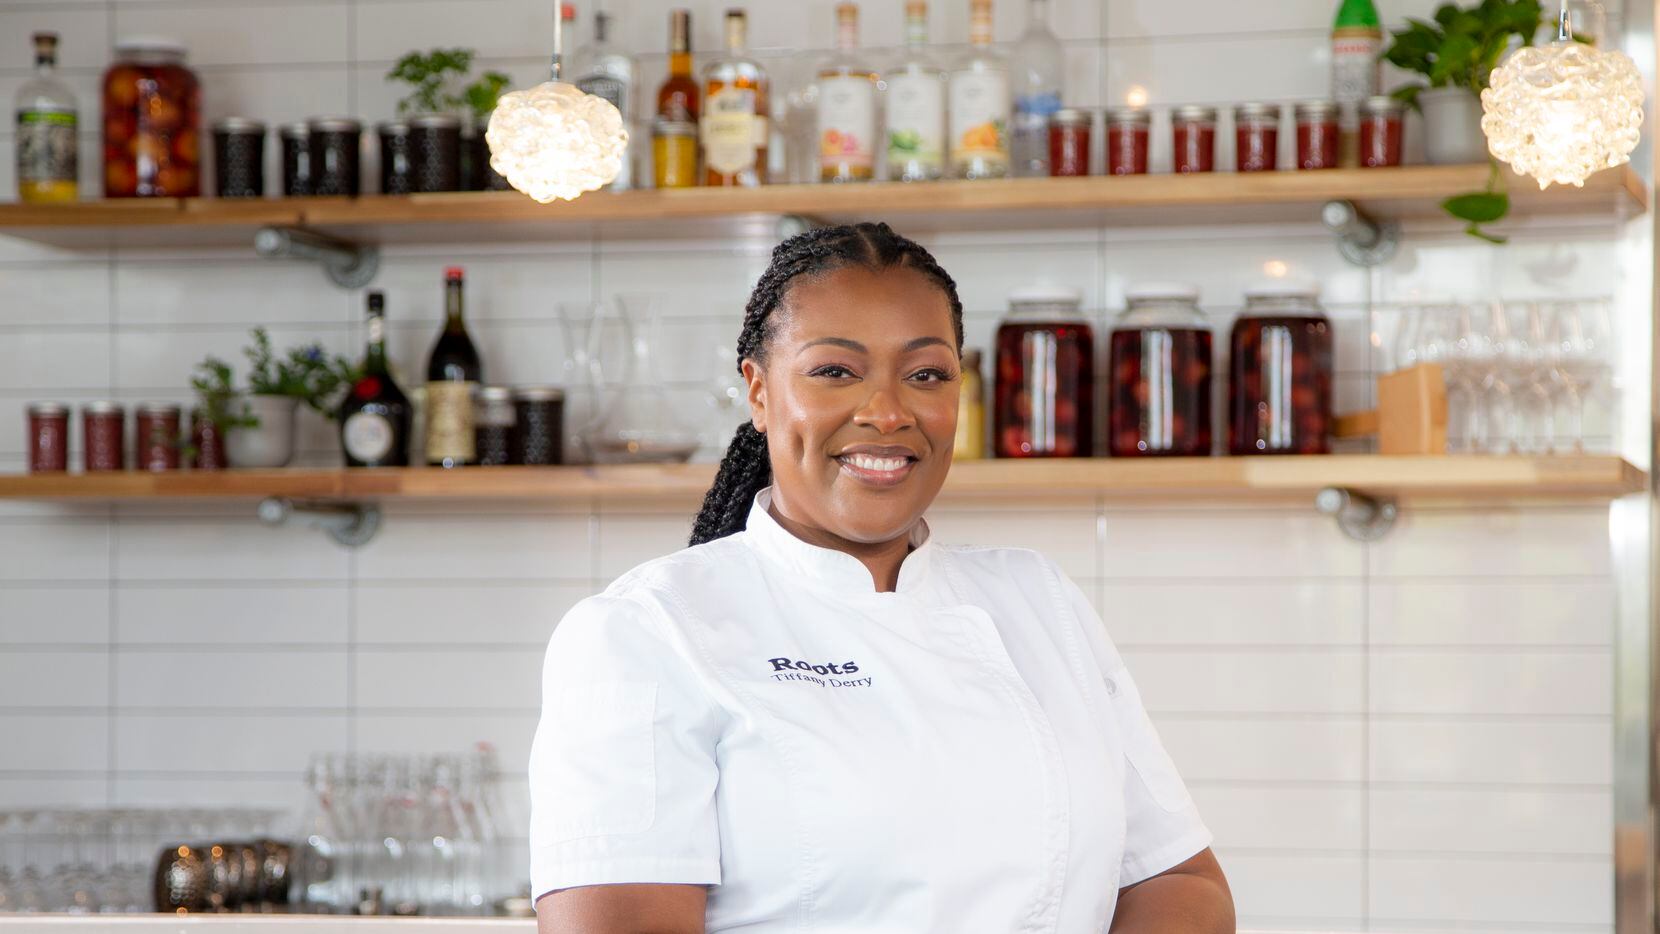 Chef-Owner Tiffany Derry at her restaurant, Roots Southern Kitchen, in Farmers Branch.